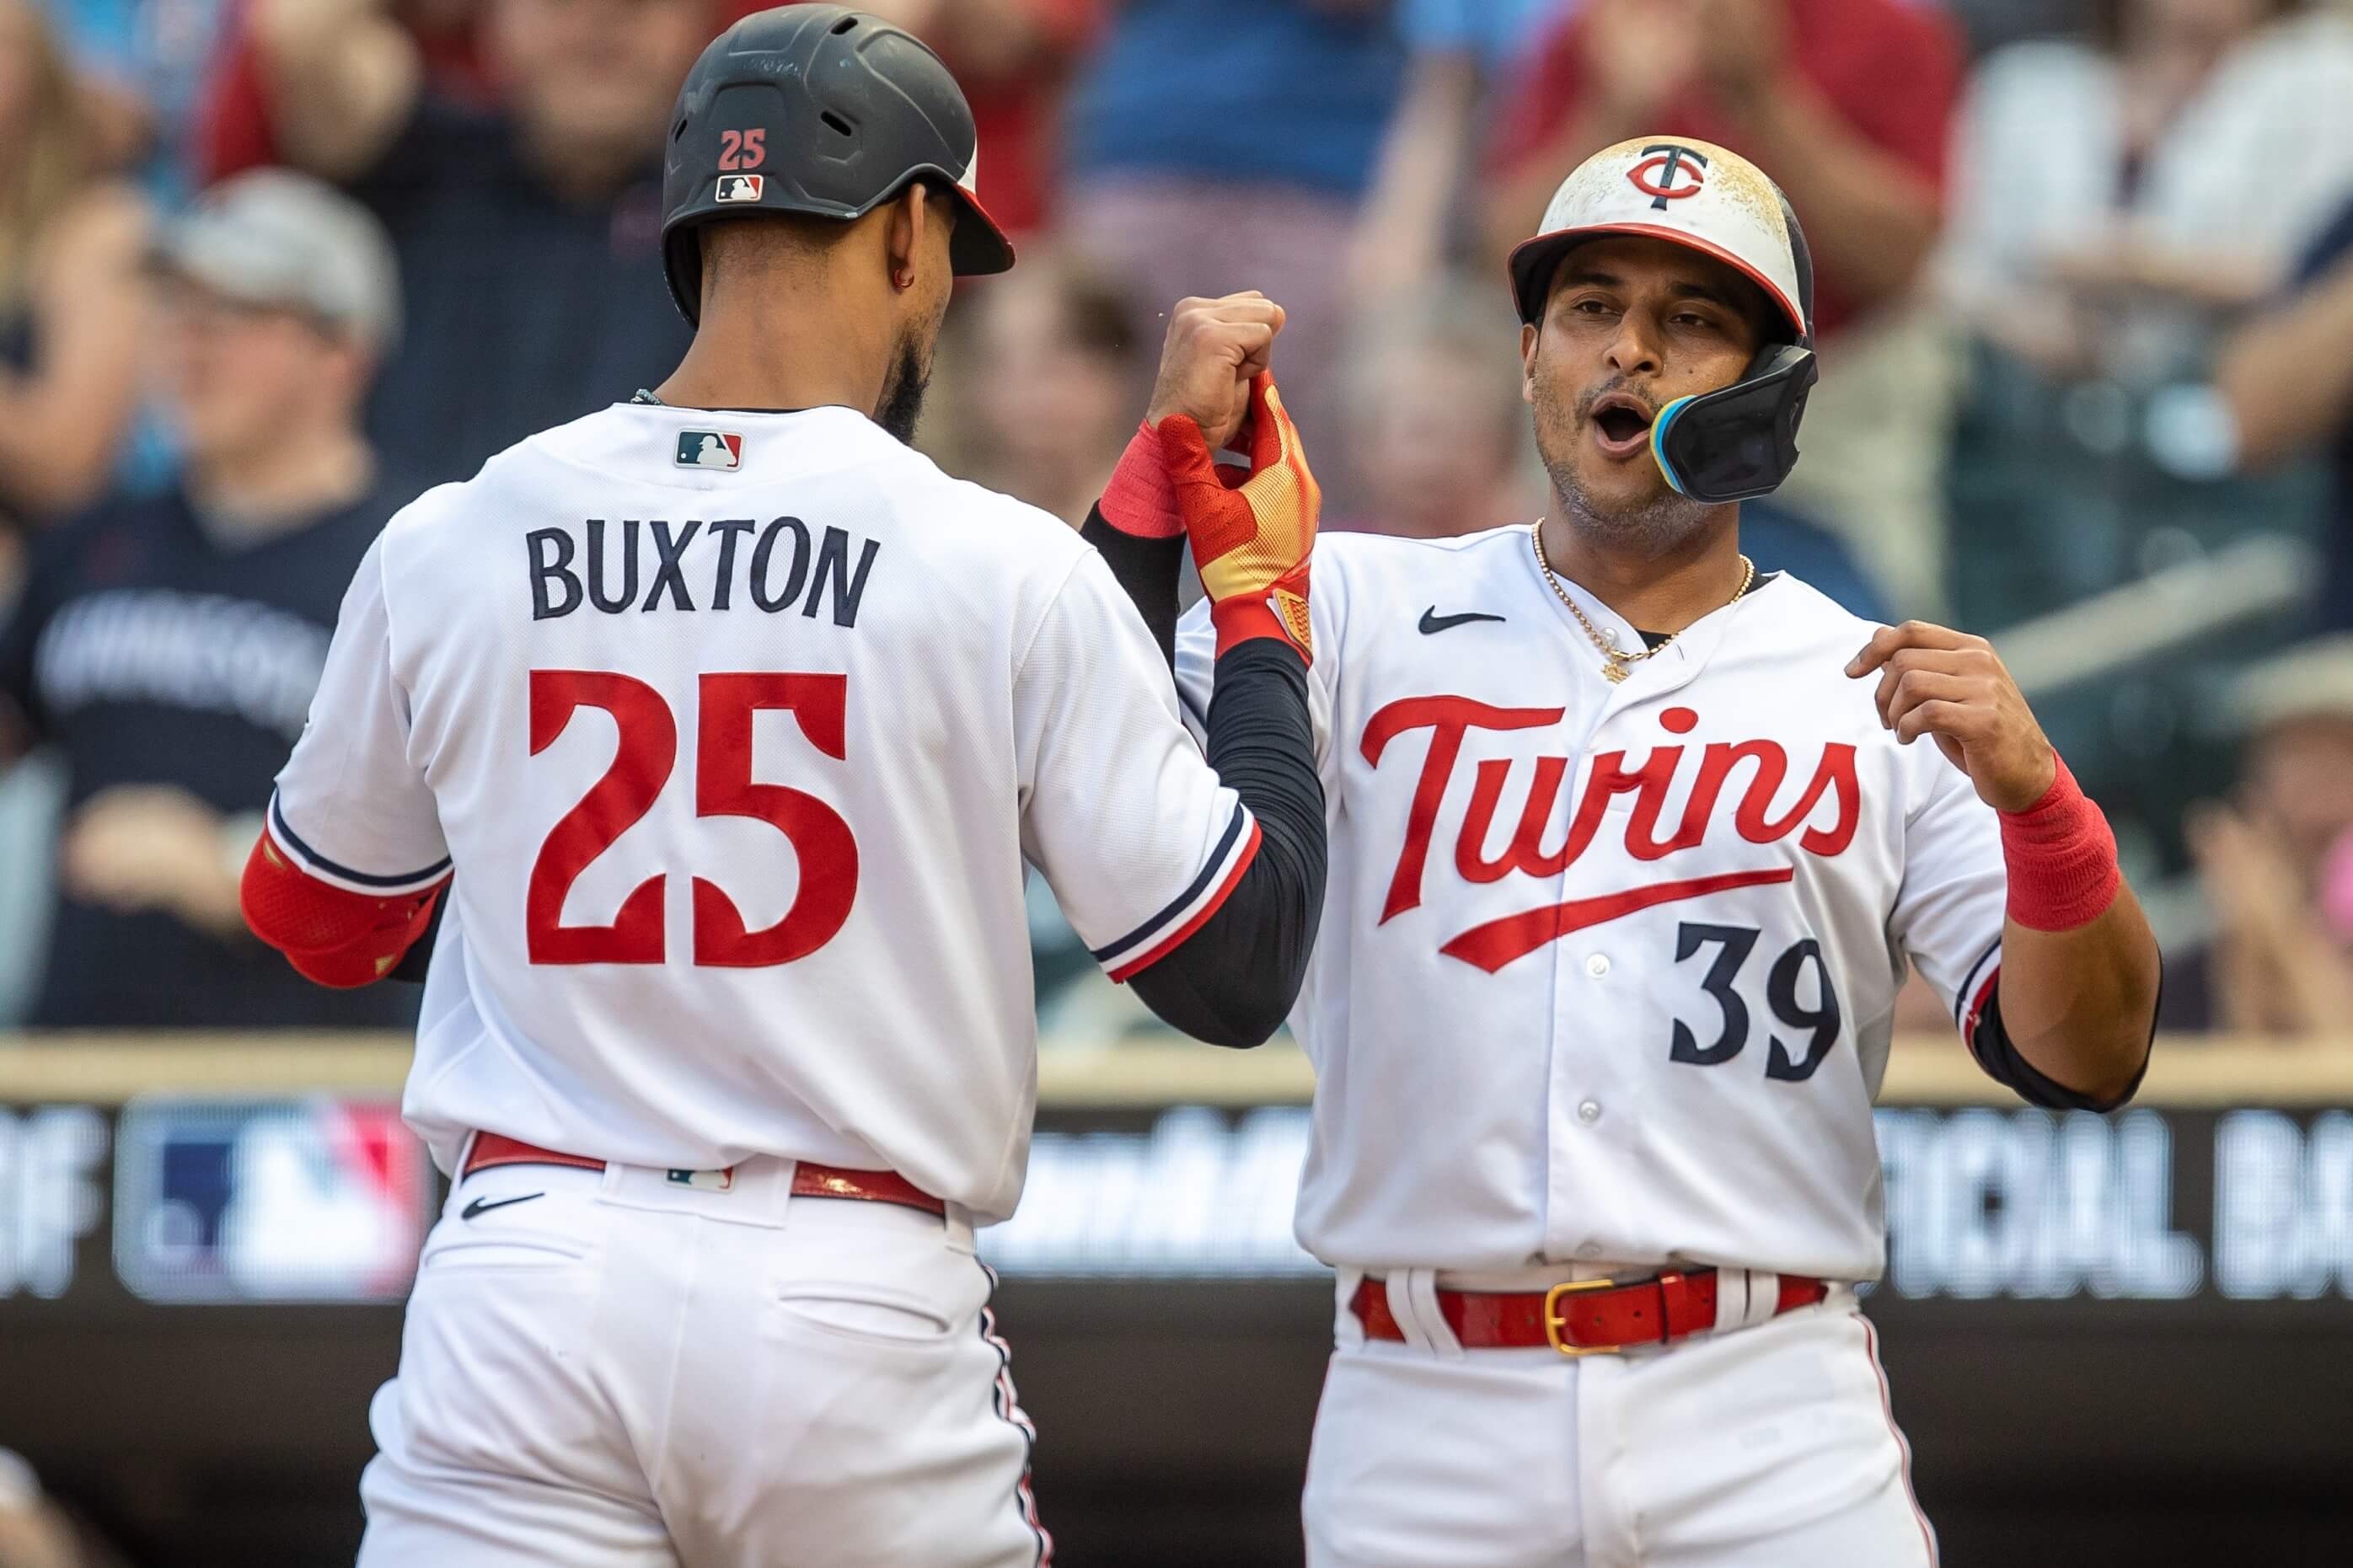 Twins Season Preview: Minnesota Twins are atop the AL Central